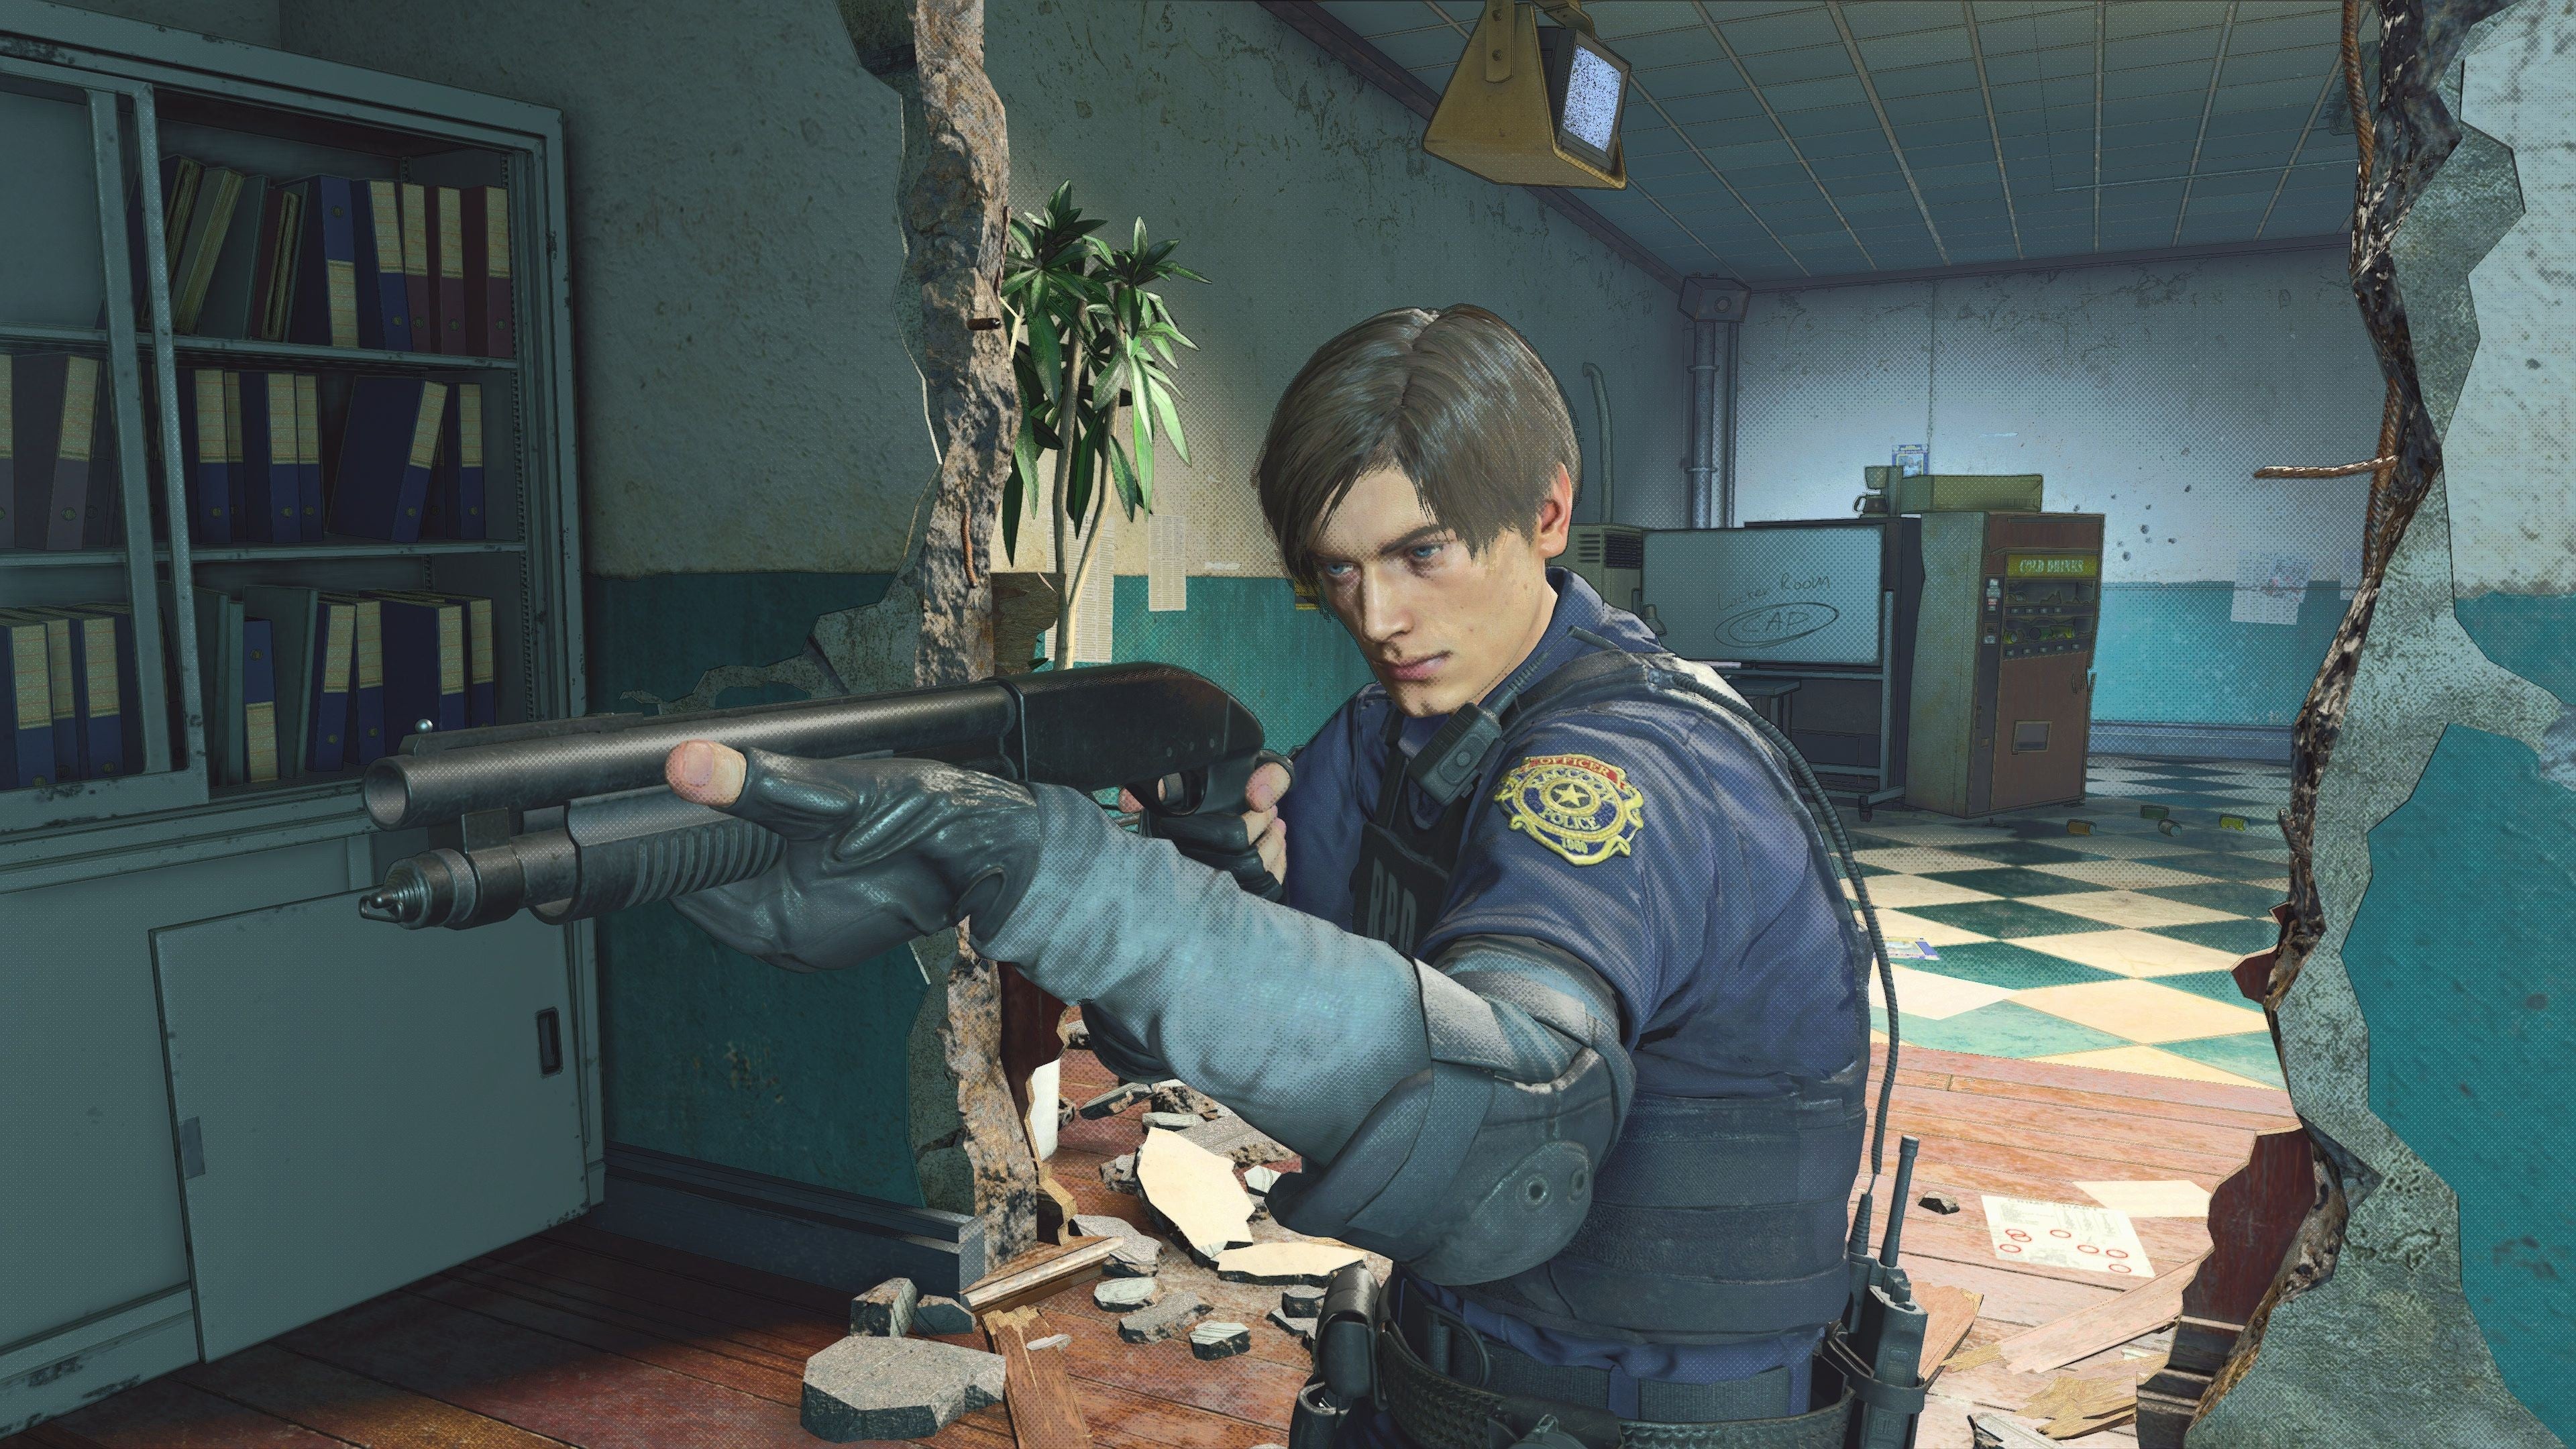 Image for Resident Evil RE: Verse open beta coming to consoles and PC next month